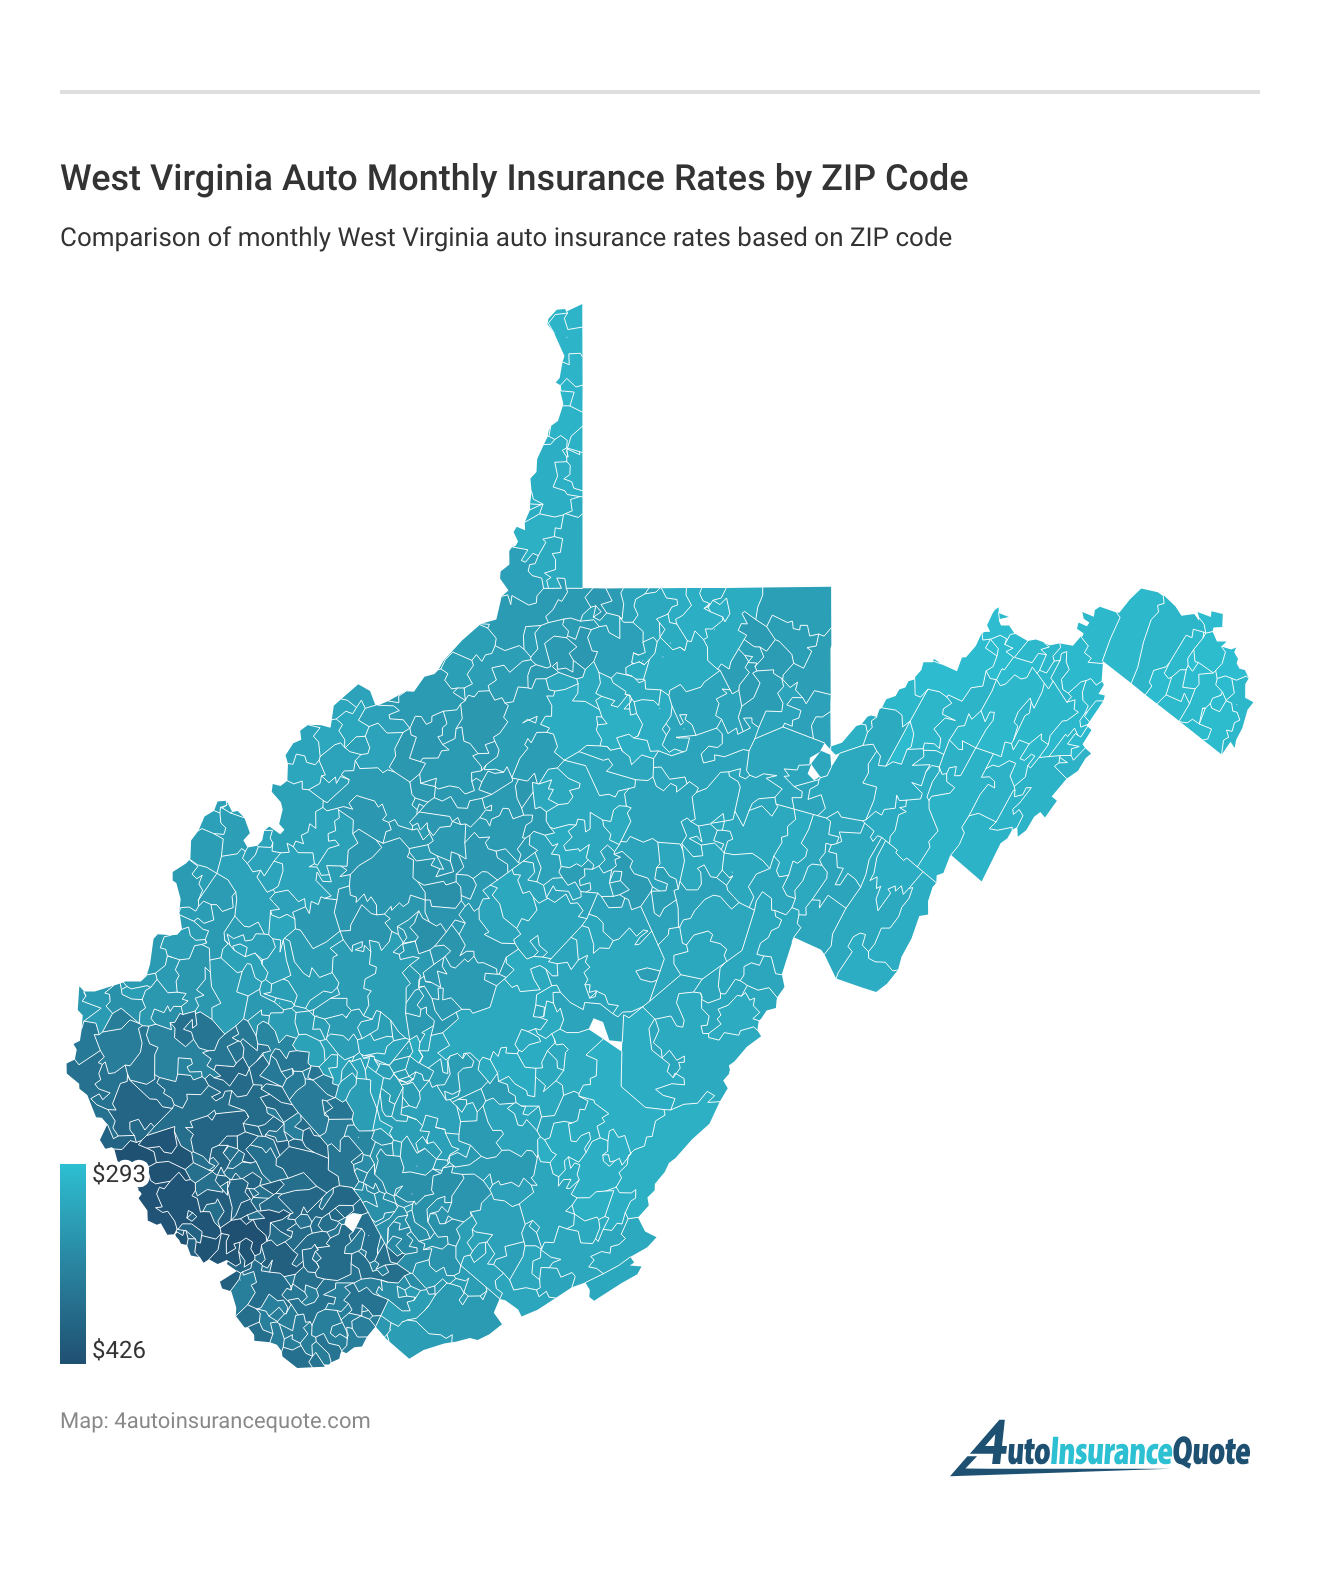 <h3>West Virginia Auto Monthly Insurance Rates by ZIP Code</h3>